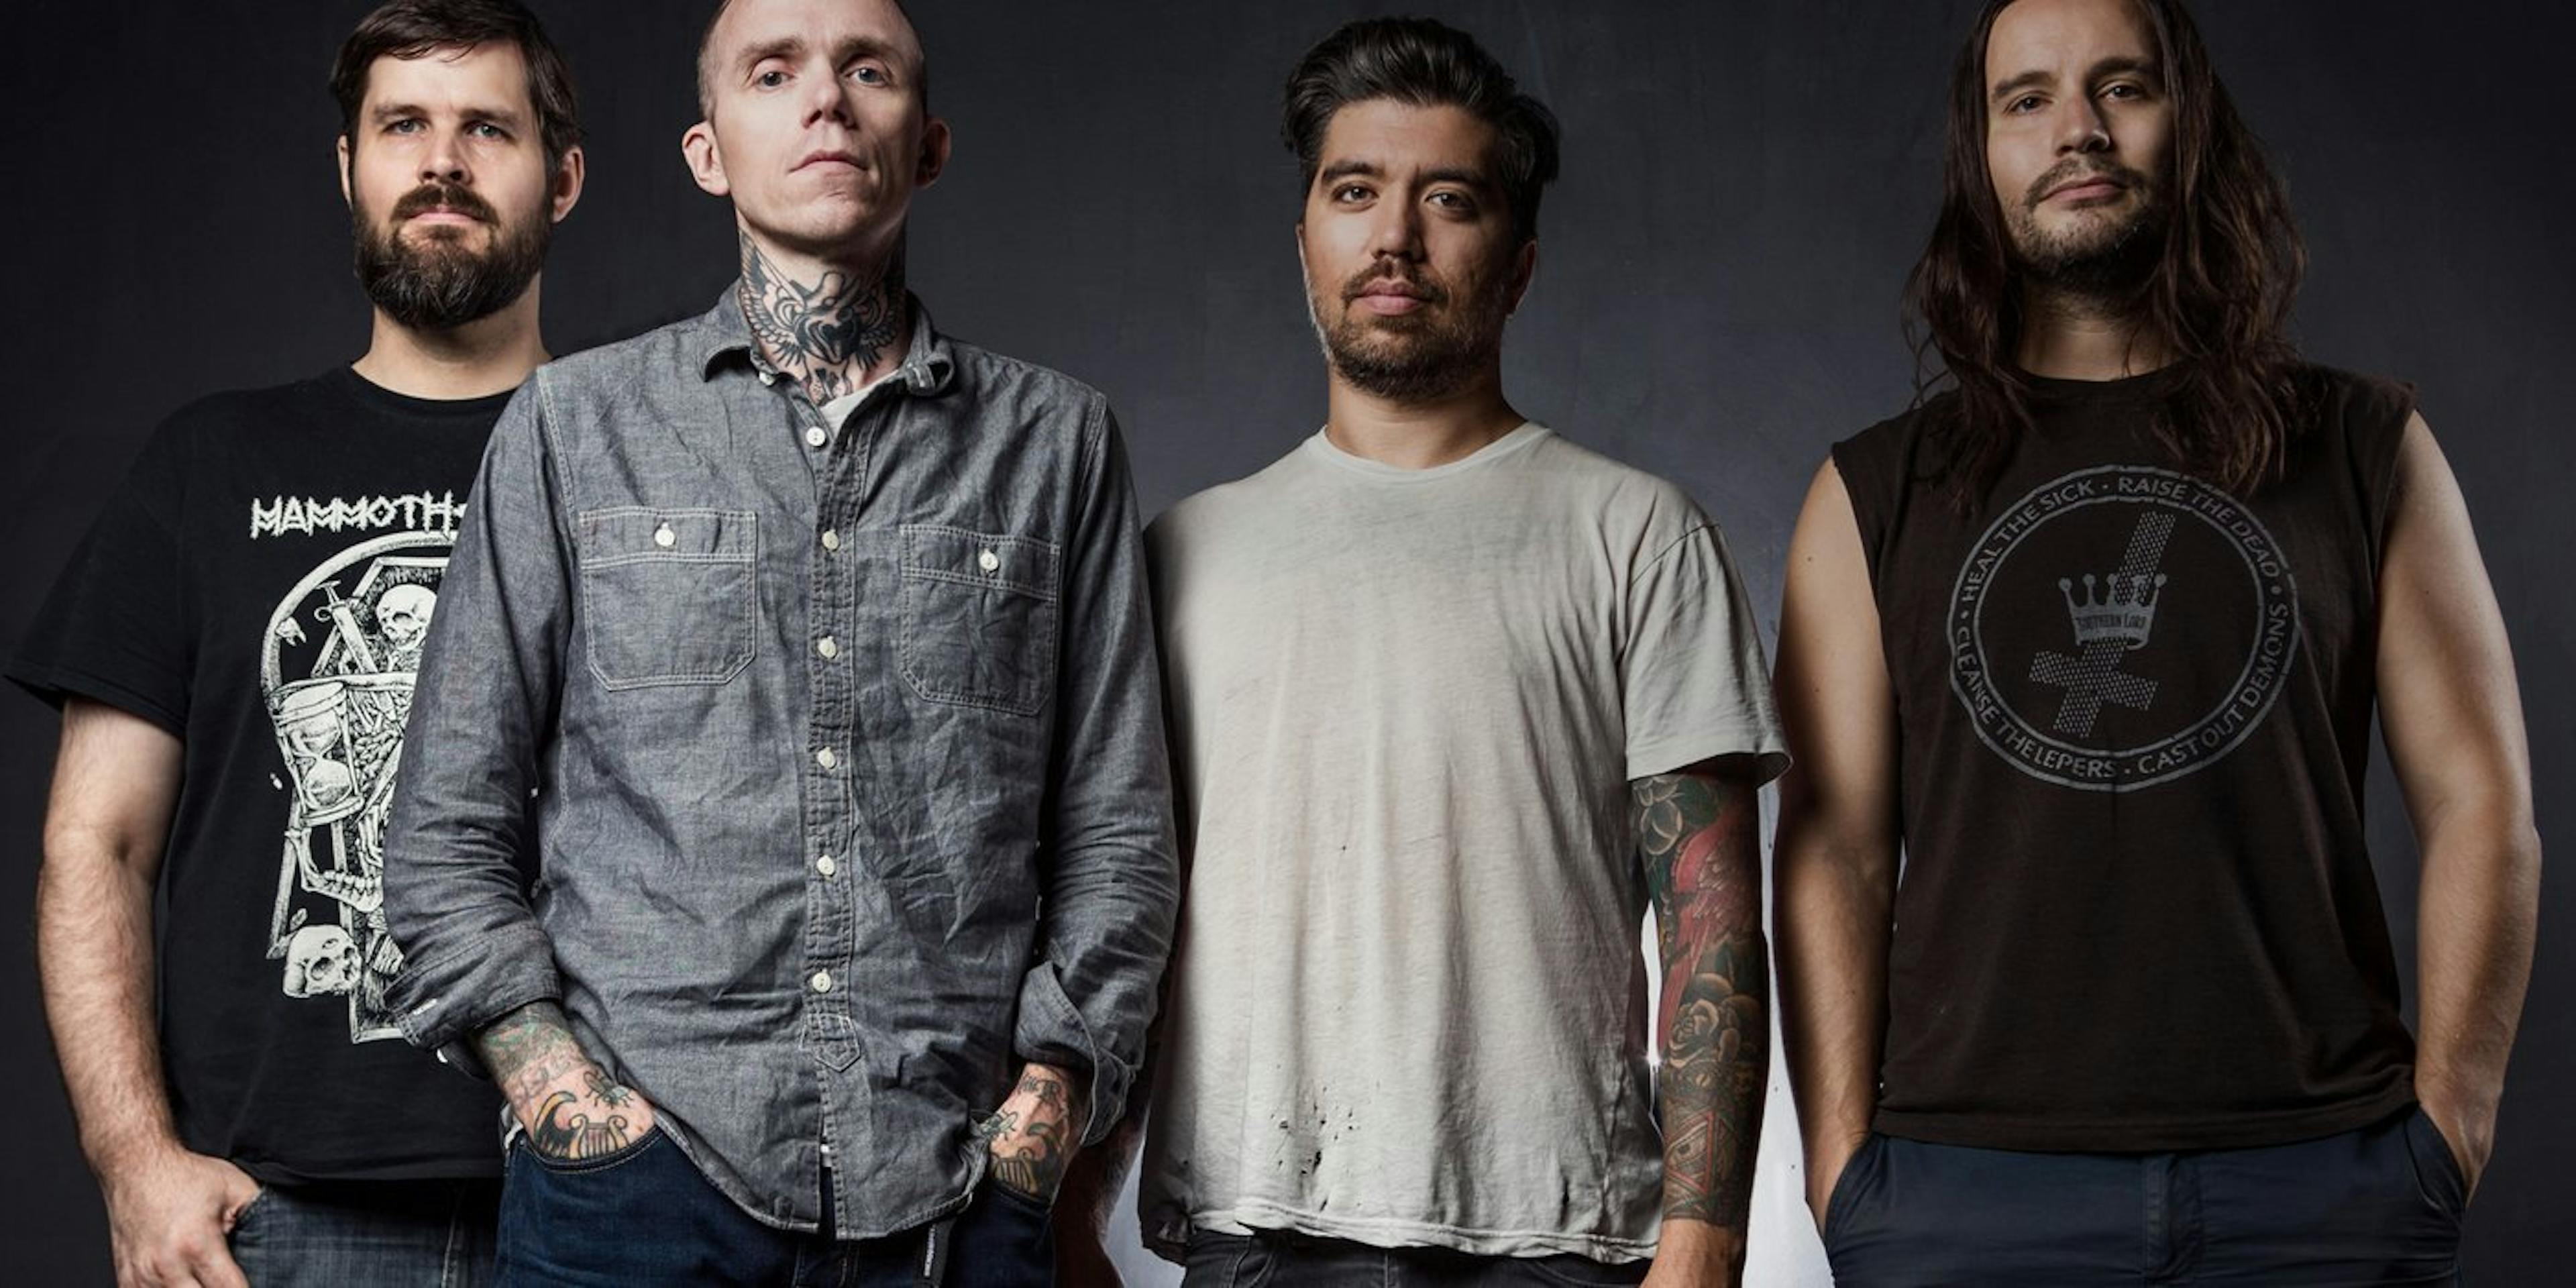 Check Out The New Converge Material Like Your Life Depends On It